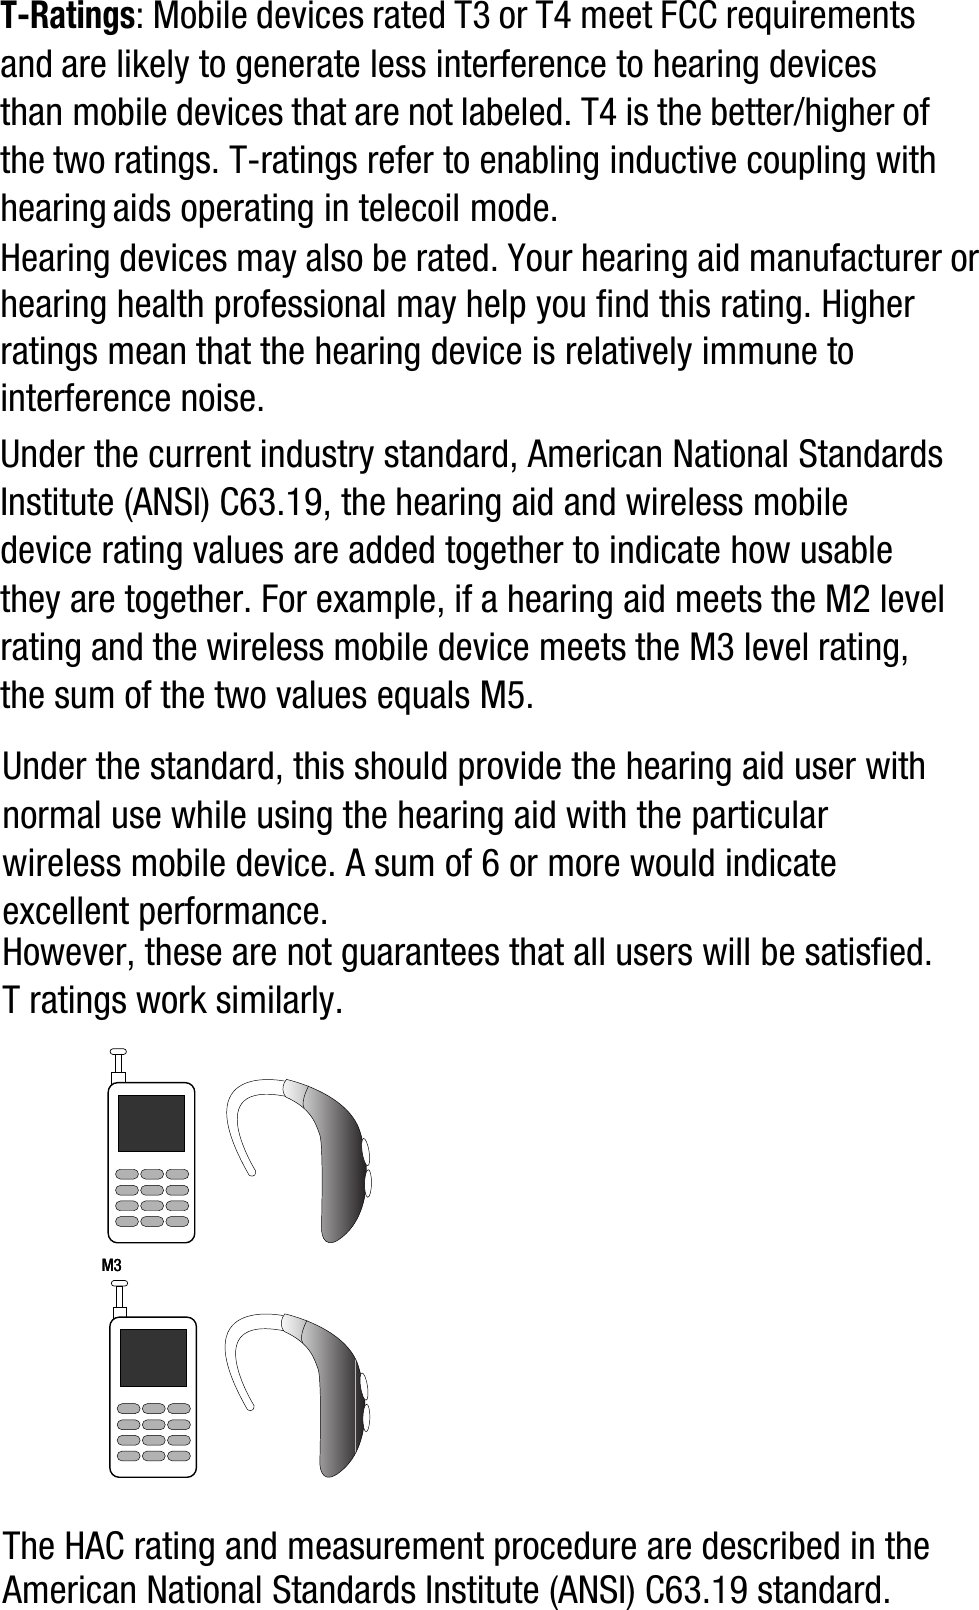 T-Ratings: Mobile devices rated T3 or T4 meet FCC requirements and are likely to generate less interference to hearing devices than mobile devices that are not labeled. T4 is the better/higher of the two ratings. T-ratings refer to enabling inductive coupling with hearing aids operating in telecoil mode.Hearing devices may also be rated. Your hearing aid manufacturer or hearing health professional may help you find this rating. Higher ratings mean that the hearing device is relatively immune to interference noise. Under the current industry standard, American National Standards Institute (ANSI) C63.19, the hearing aid and wireless mobile device rating values are added together to indicate how usable they are together. For example, if a hearing aid meets the M2 level rating and the wireless mobile device meets the M3 level rating, the sum of the two values equals M5. Under the standard, this should provide the hearing aid user with normal use while using the hearing aid with the particular wireless mobile device. A sum of 6 or more would indicate excellent performance.  However, these are not guarantees that all users will be satisfied. T ratings work similarly.The HAC rating and measurement procedure are described in the American National Standards Institute (ANSI) C63.19 standard.M3M3       